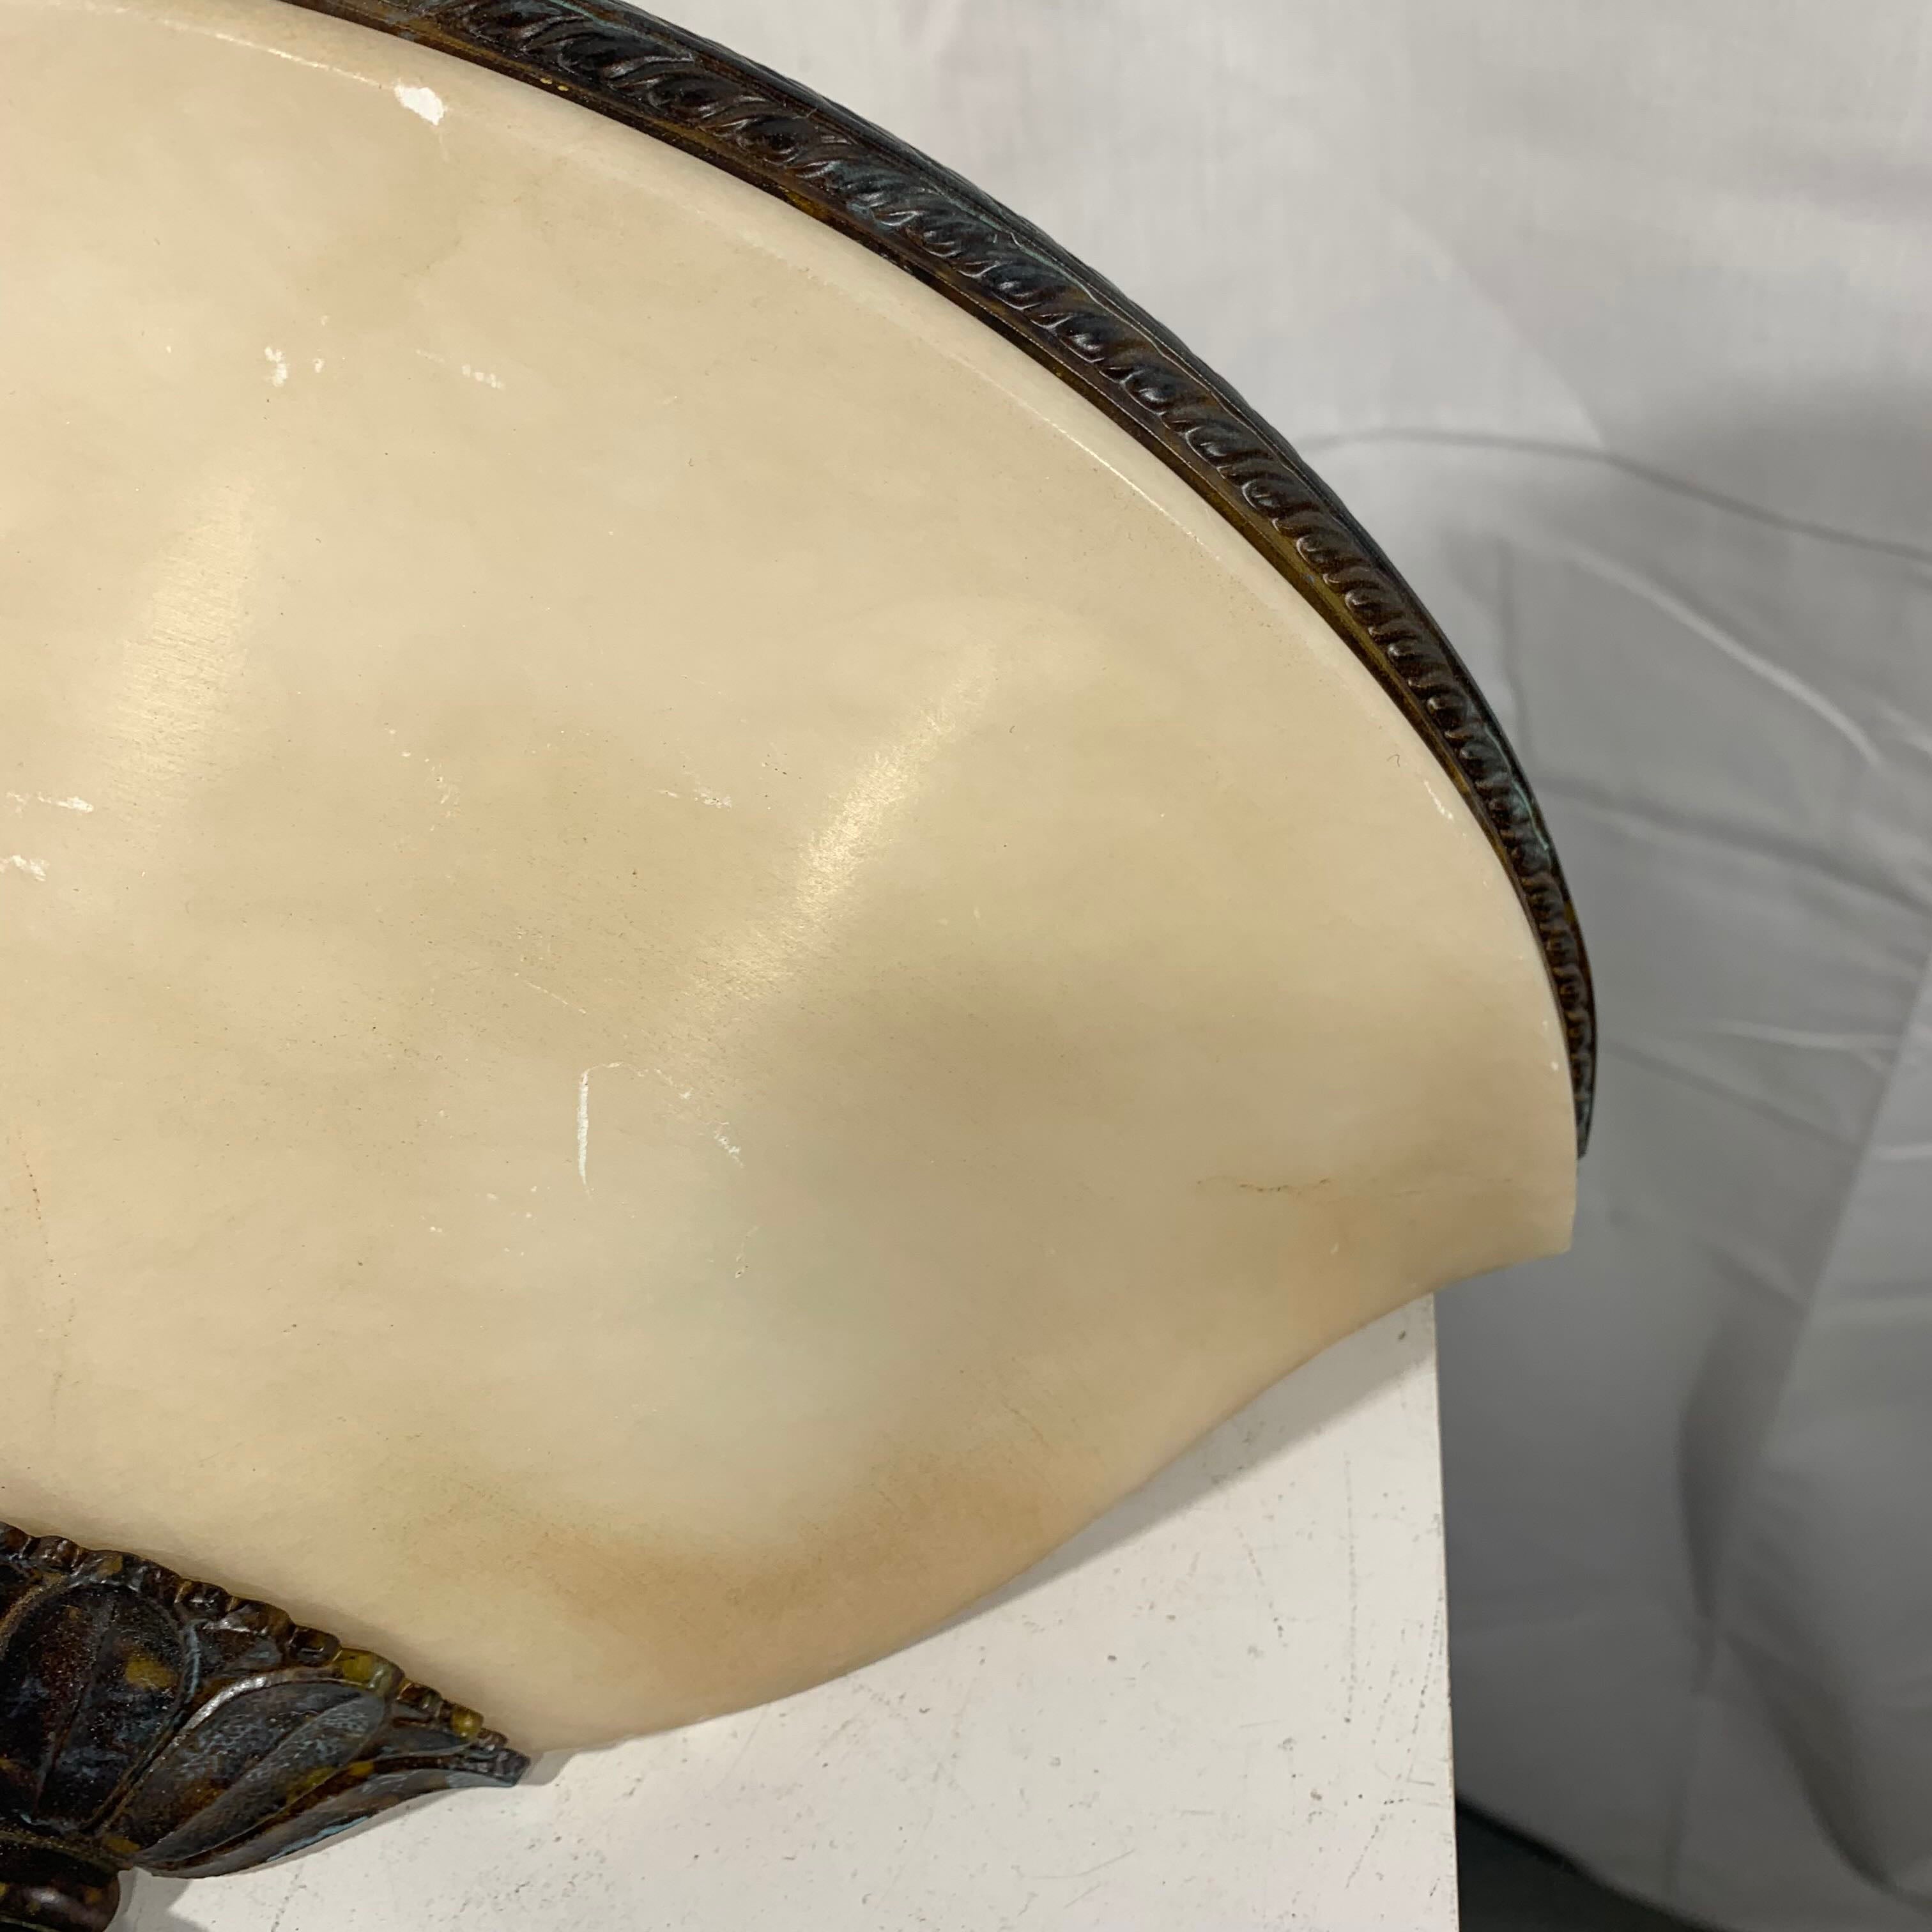 13.5"x 6.5"x 6.5" Half Moon Alabaster with Ornate Metal Wall Sconce Cover